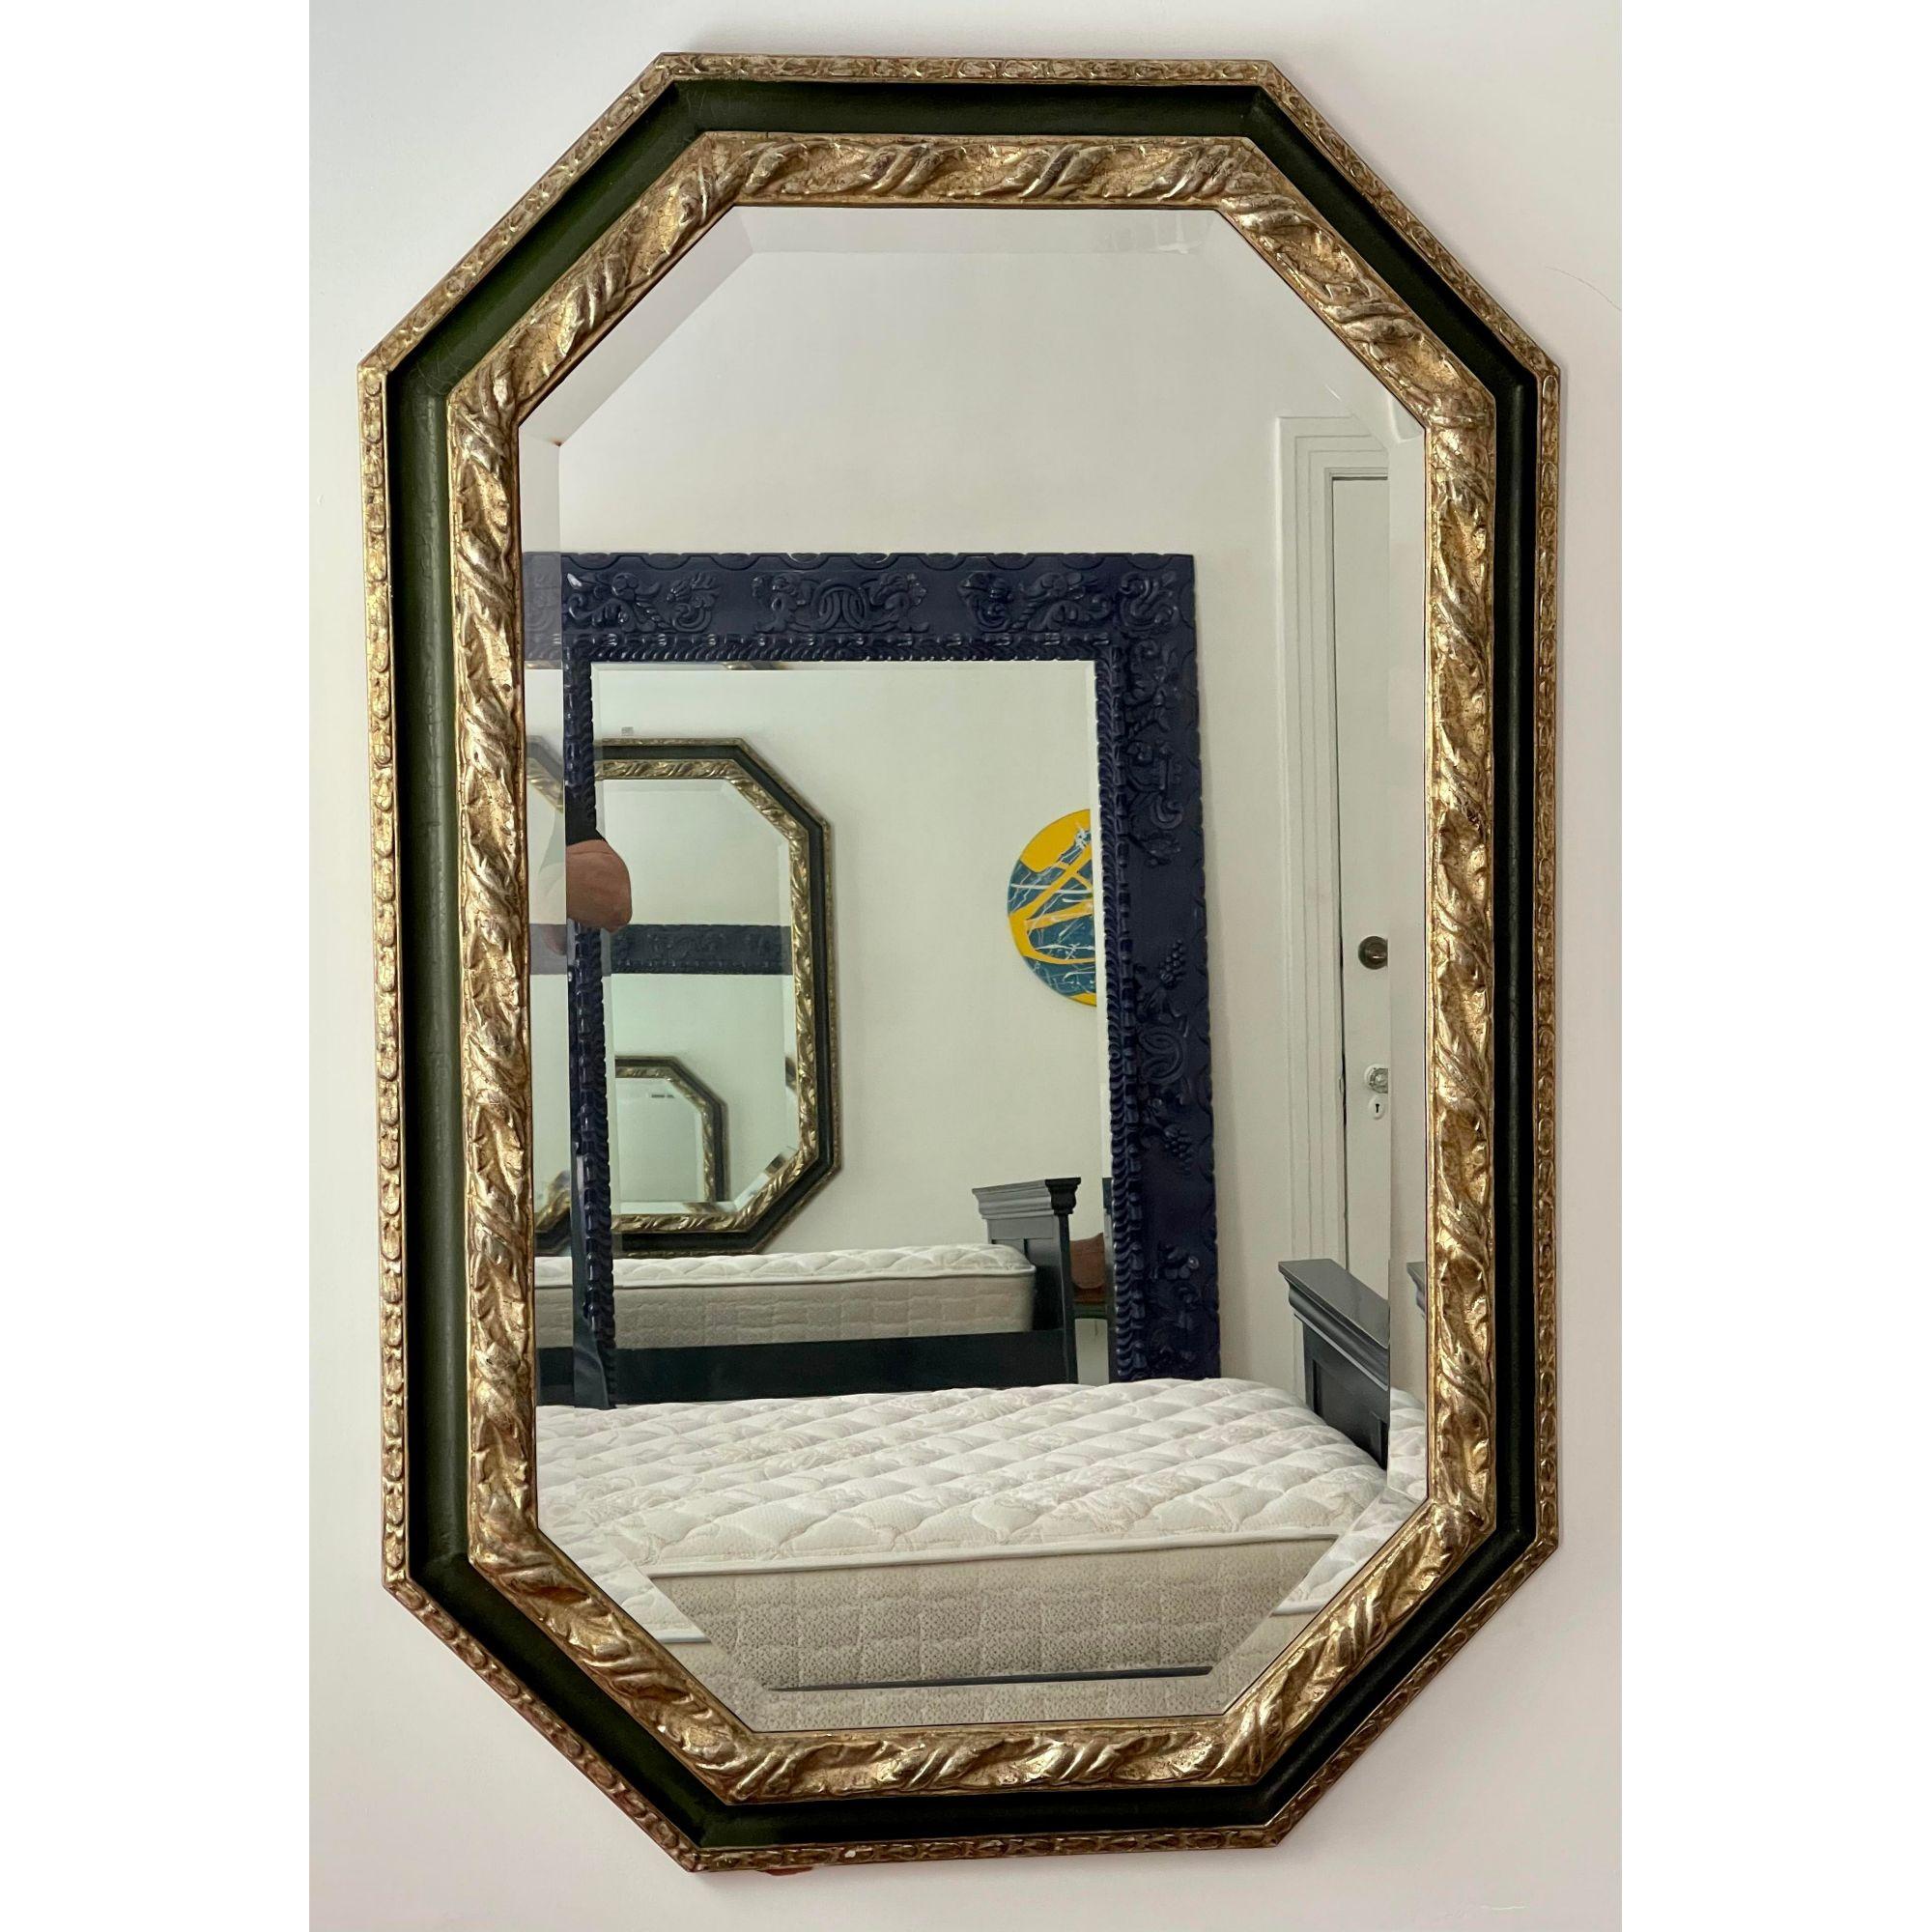 Hand carved Ebanista white gold & dark green octagonal mirror. 

Additional information: 
Materials: Gold, Mirror
Color: Dark Green
Period: 1990s
Styles: Italian, Spanish
Item Type: Vintage, Antique or Pre-owned
Dimensions: 40